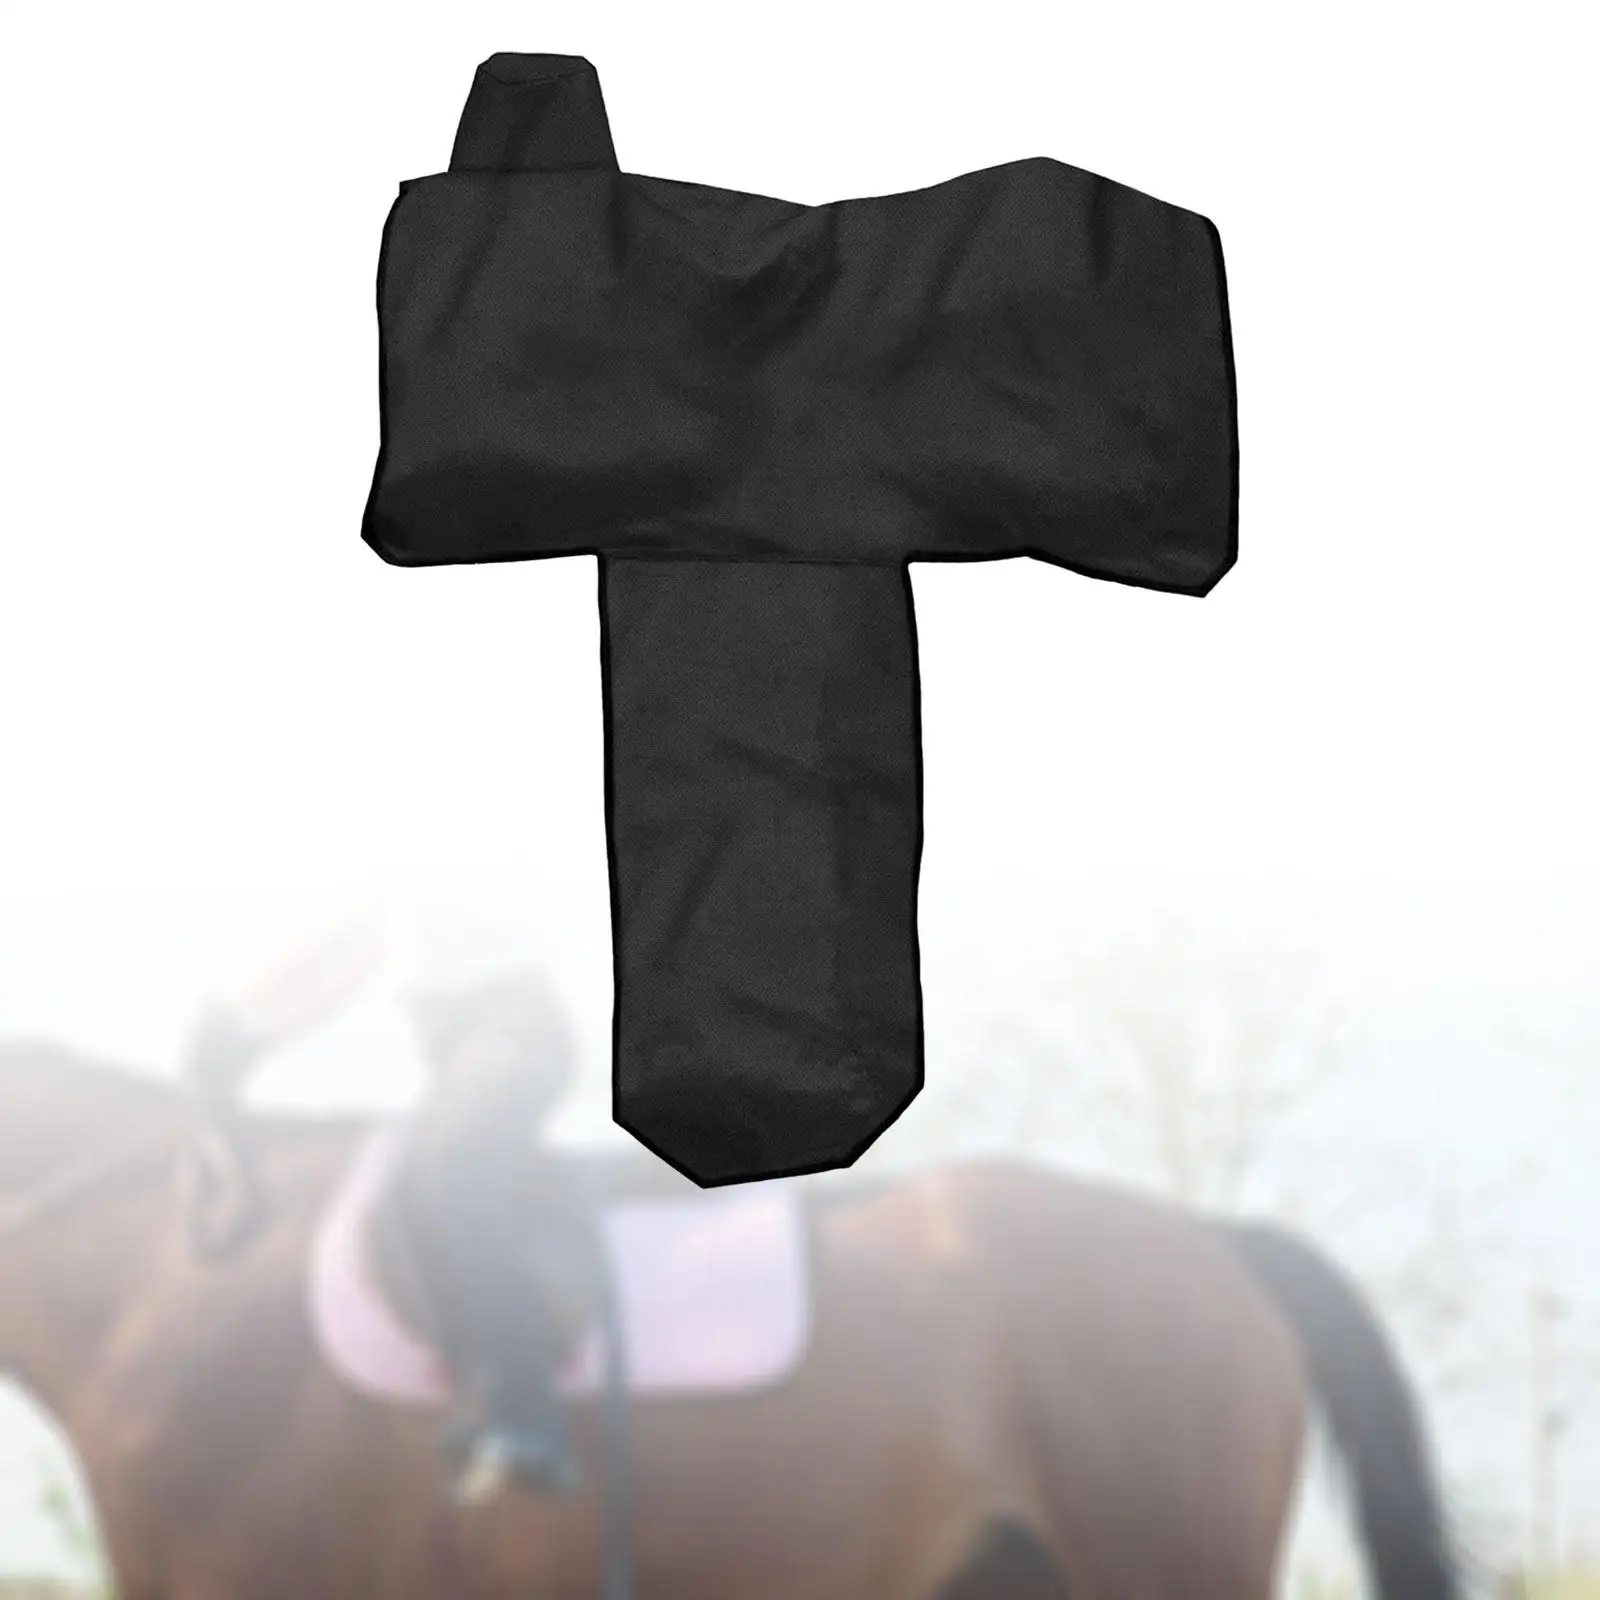 Horse Saddle Cover Durable Lightweight Water Resistant Portable Protective